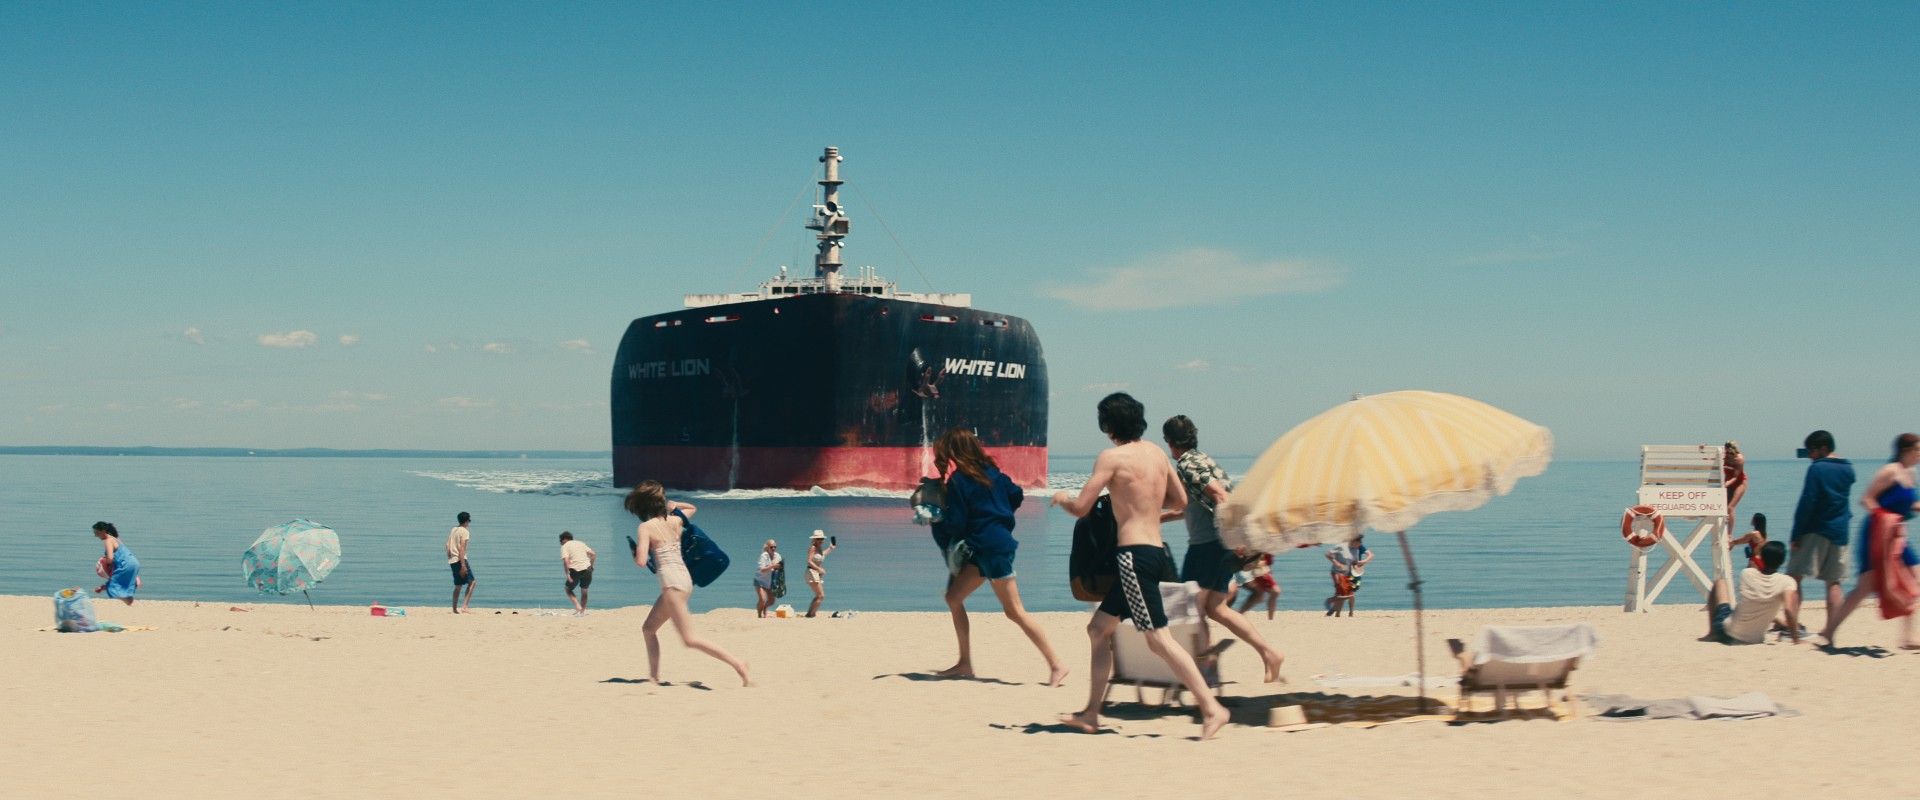 Tanker running aground on the beach in Leave the World Behind.